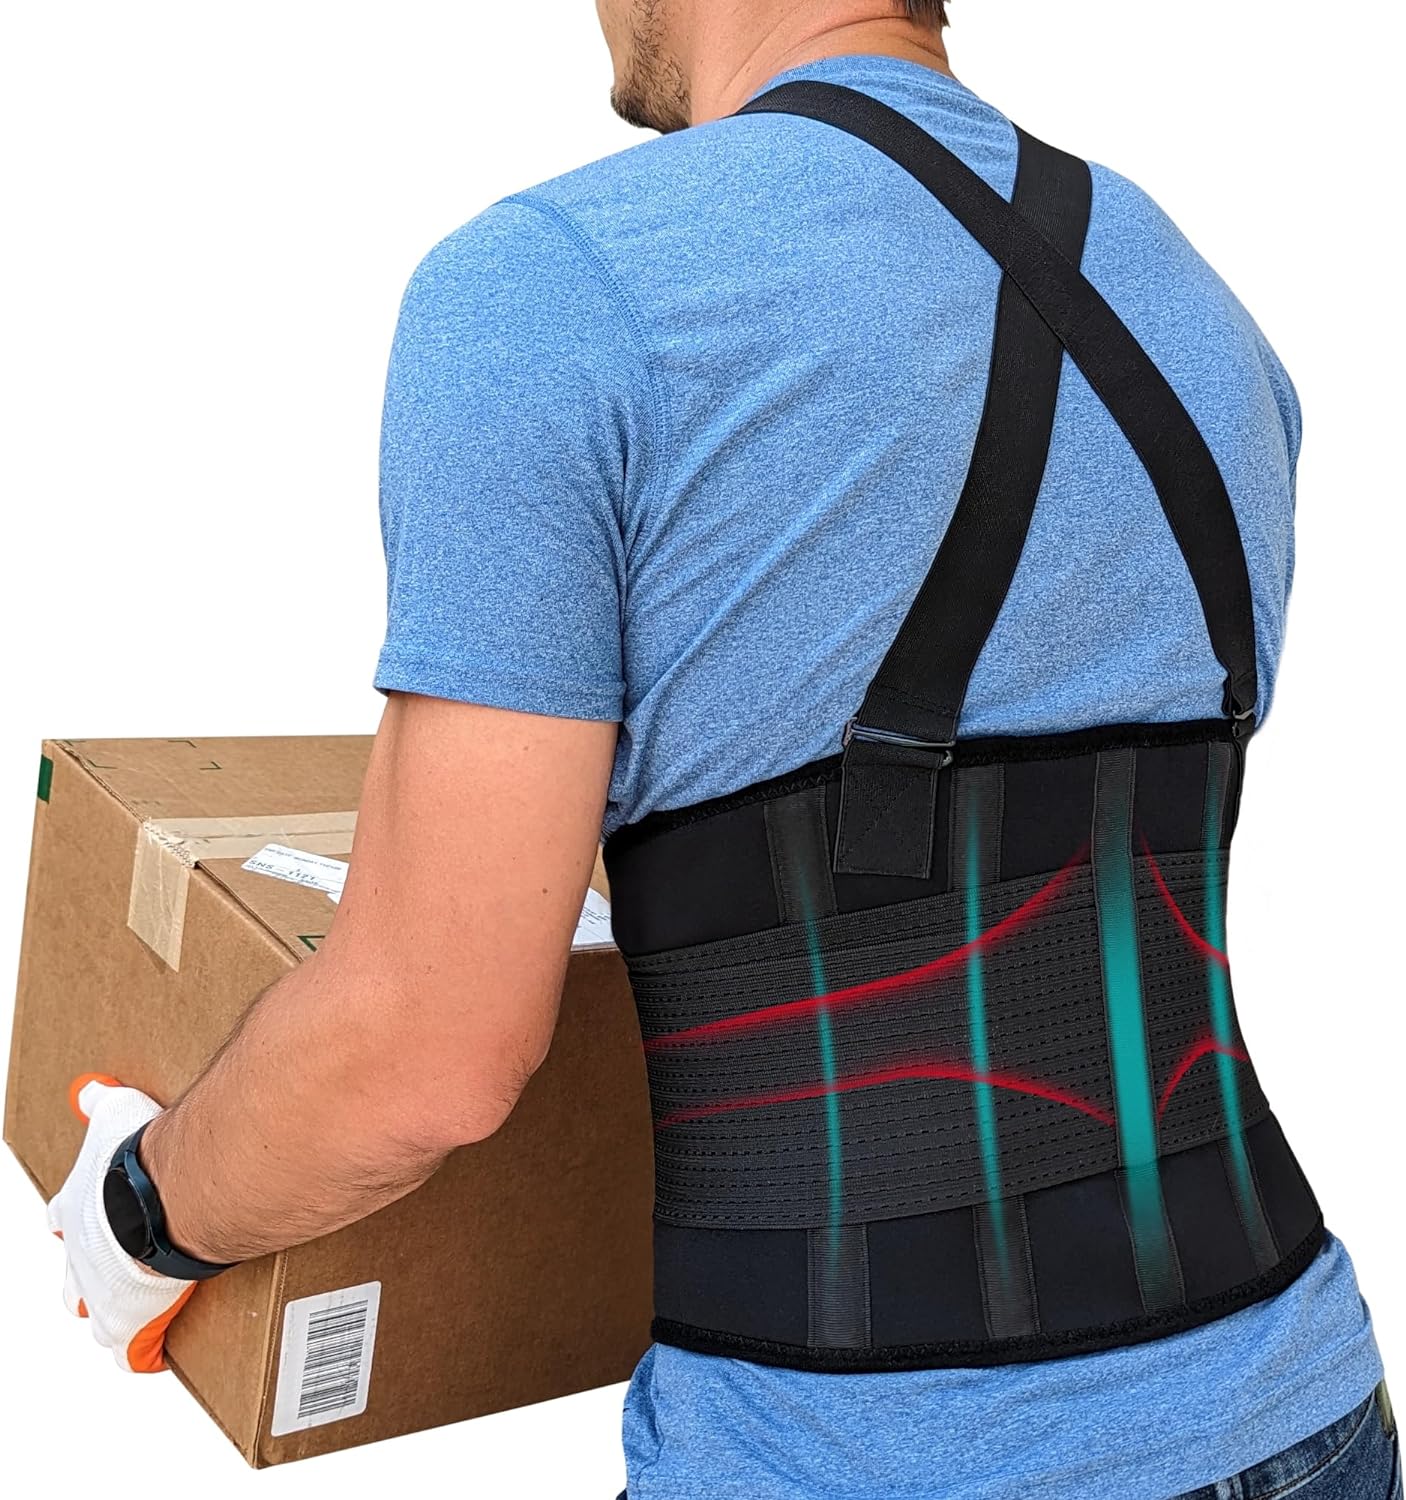 Lower Back Brace with Suspenders for Lumbar Support